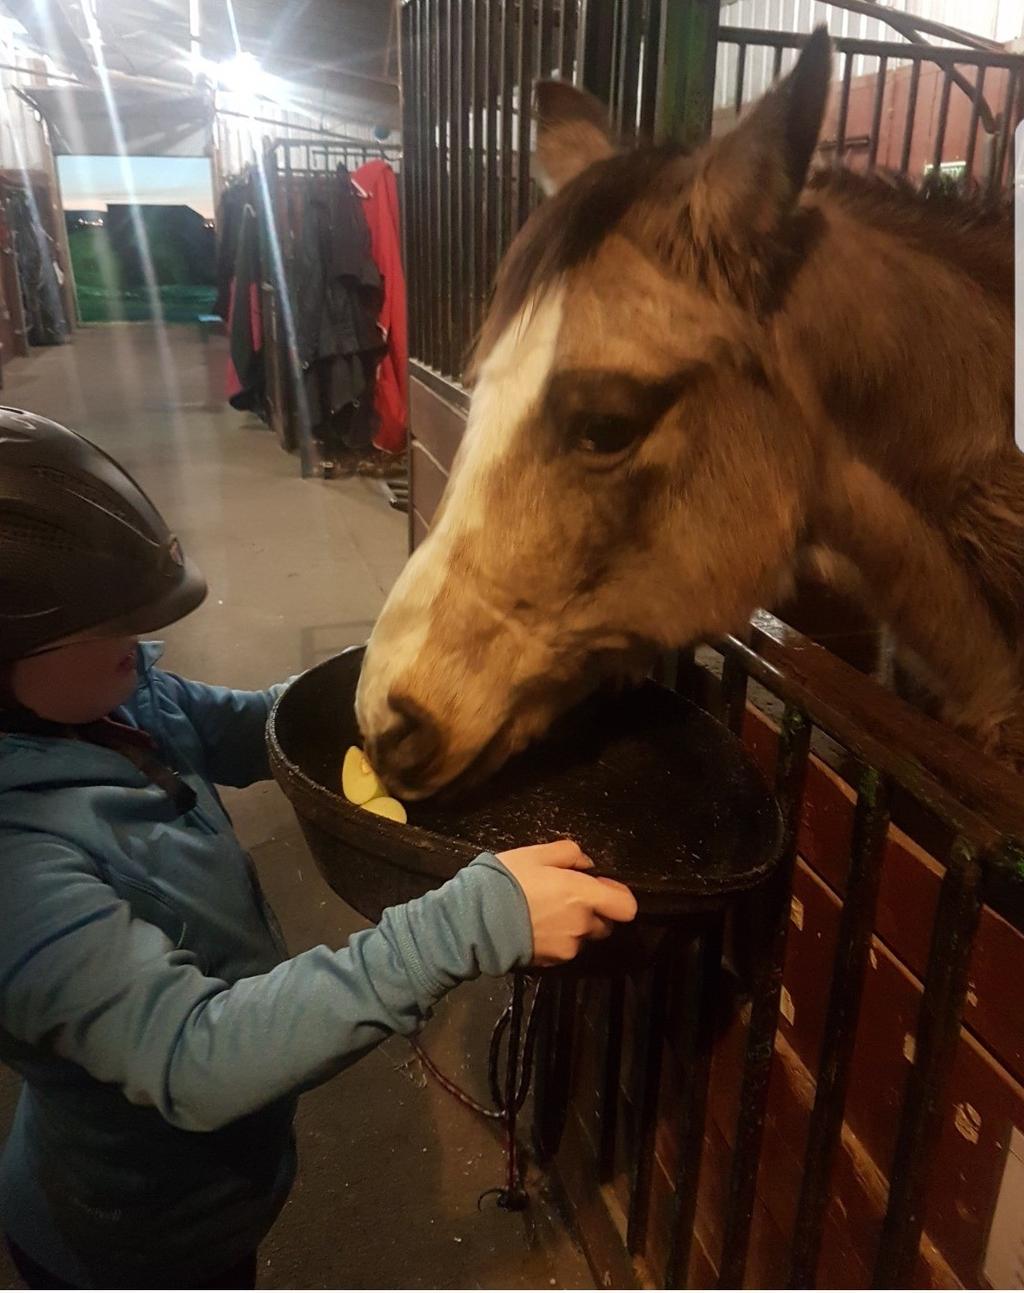 She has always had a love for all animals, especially horses, so when her mom heard about PARDS offering therapeutic riding, she felt it was obviously worth trying.